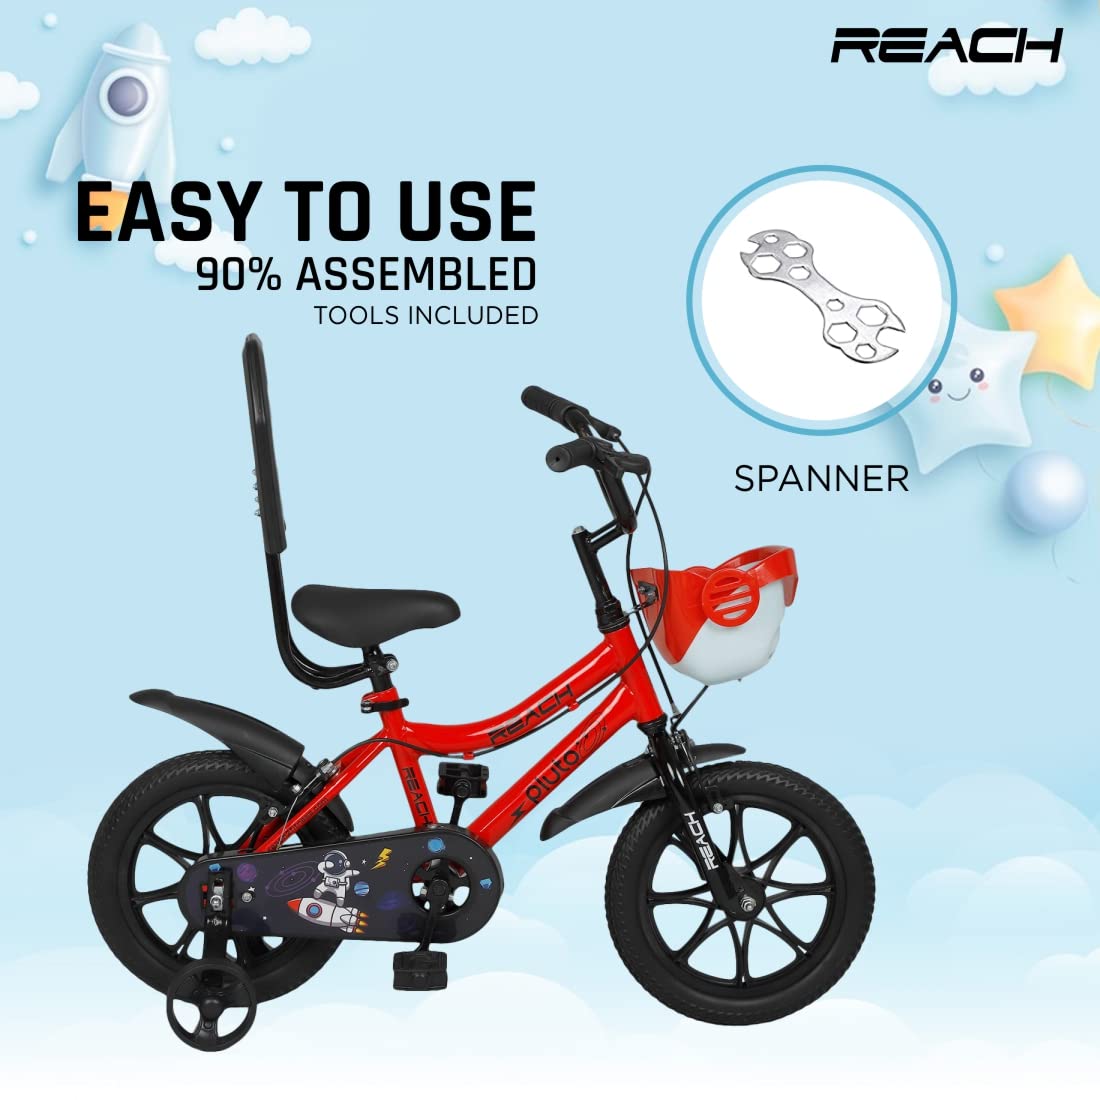 Reach Pluto 14T Juniors Kids Cycle with Training Wheels for Boys  Girls  90 Assembled  Frame Size12 Inch  Ideal for Height 3 ft   Ideal for Ages 2-5 Years